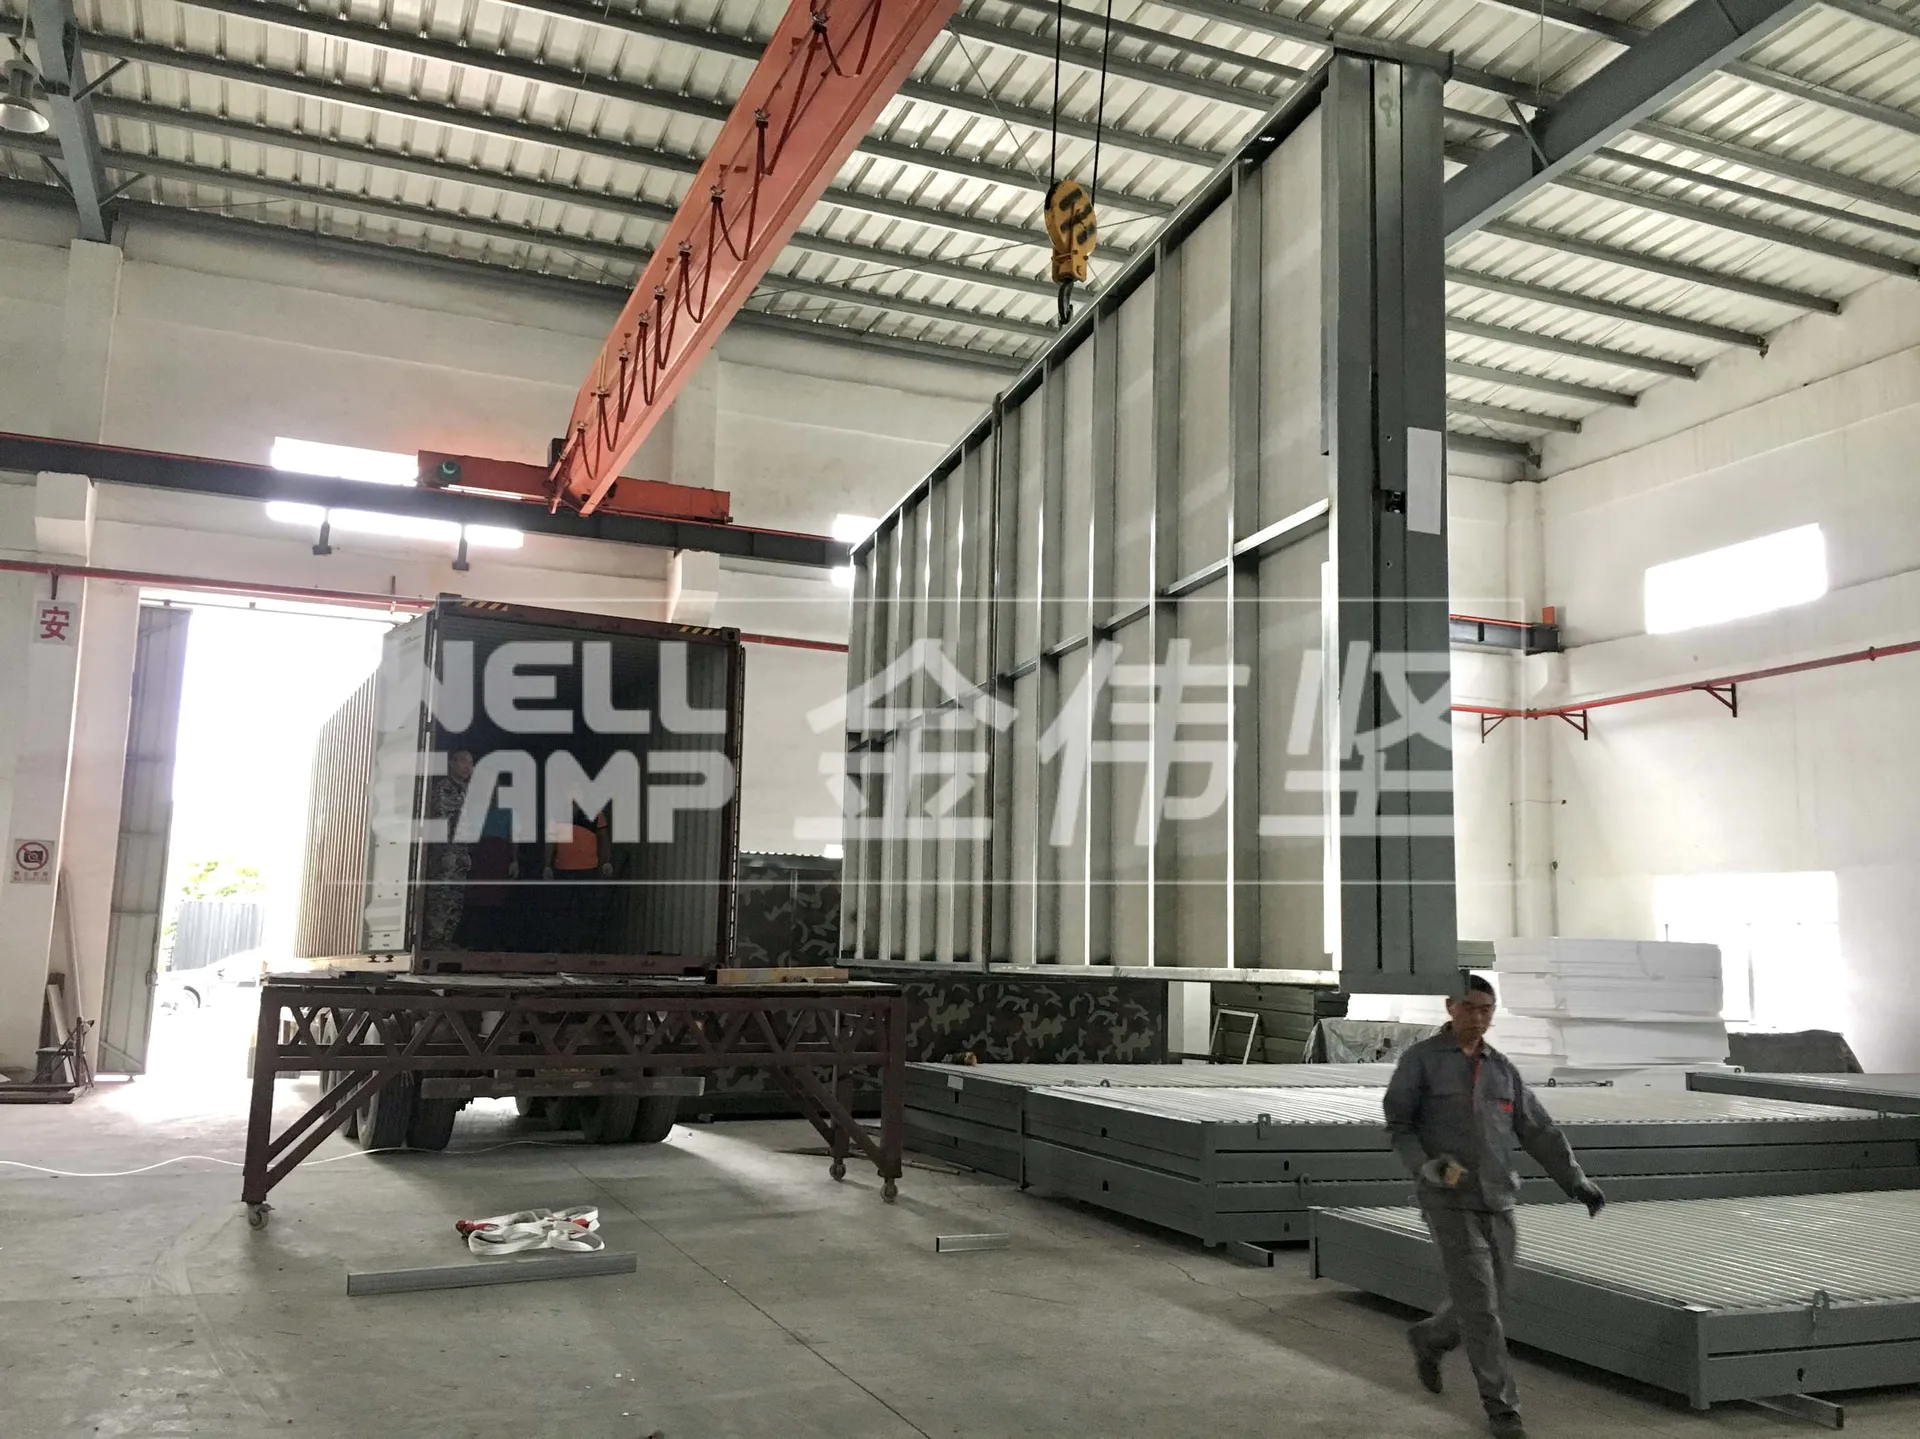 product-Wellcamp Prefab Foldable Modular Container House Price Germany Project-WELLCAMP, WELLCAMP pr-2